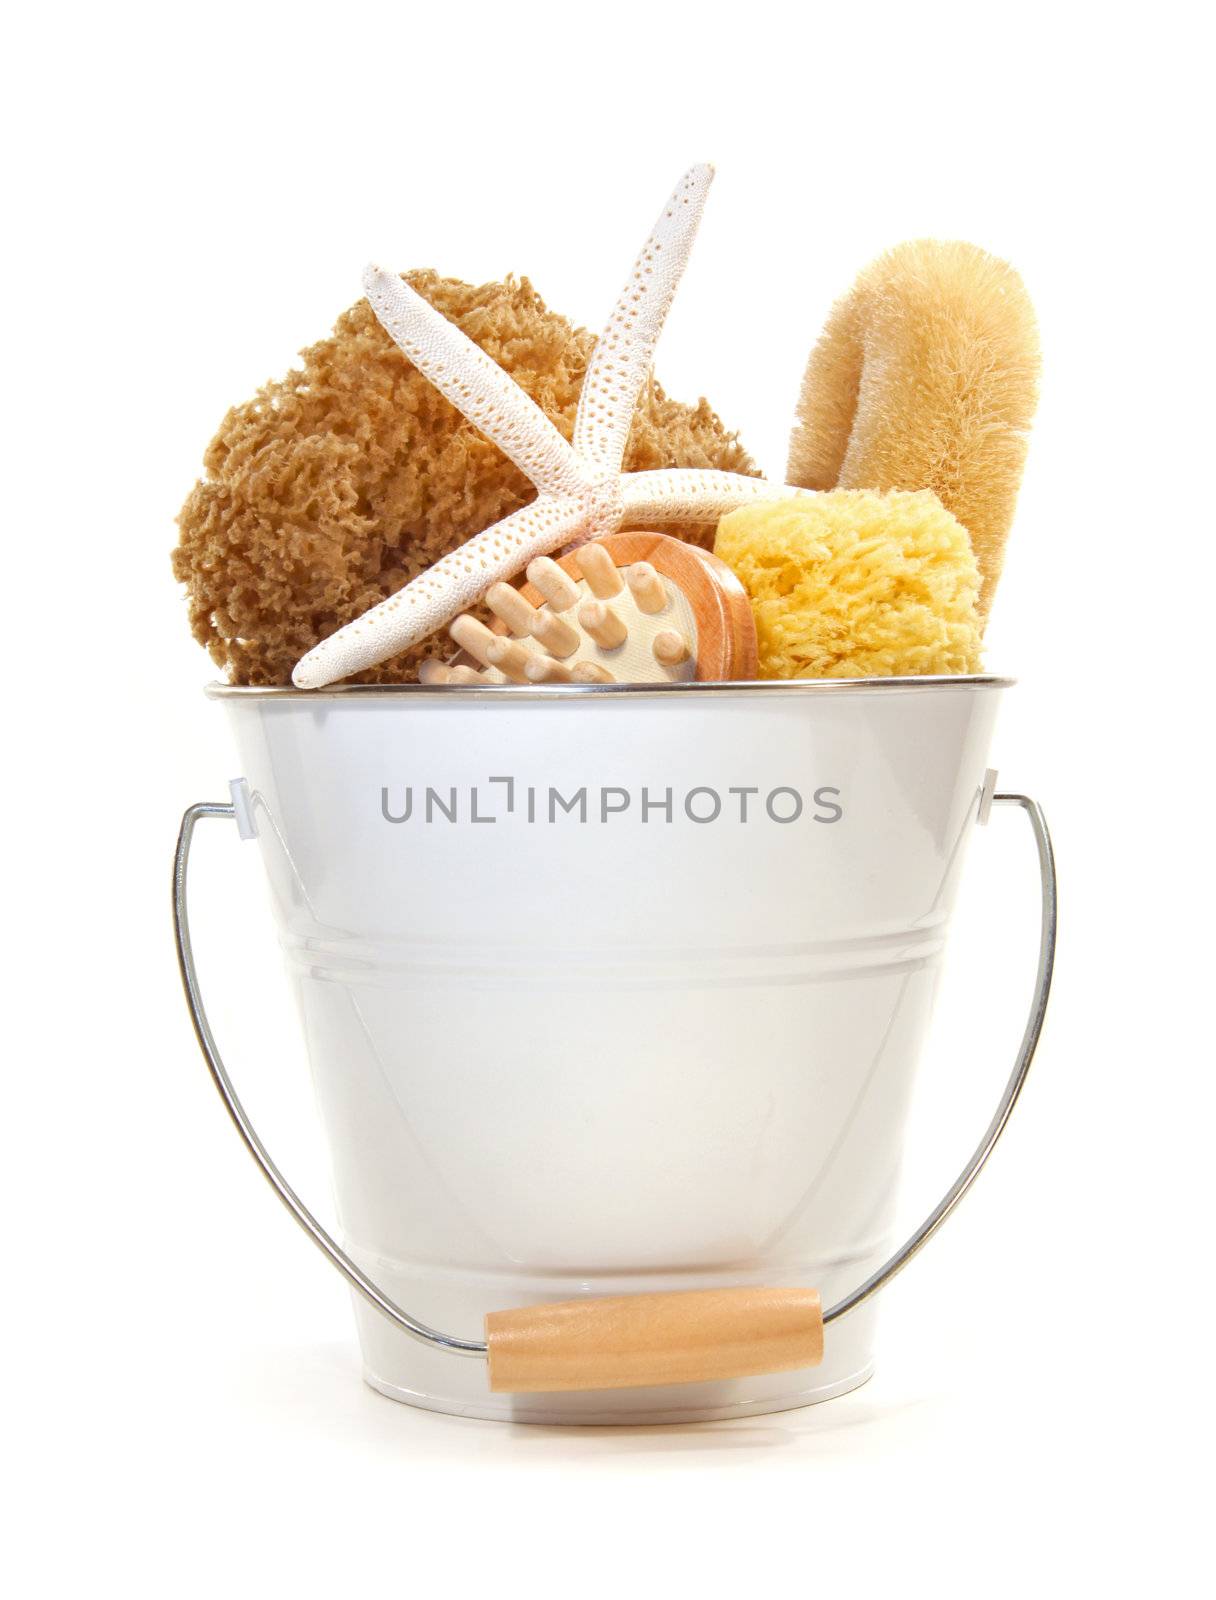 White bucket filled with sponges, brushes and starfish on white